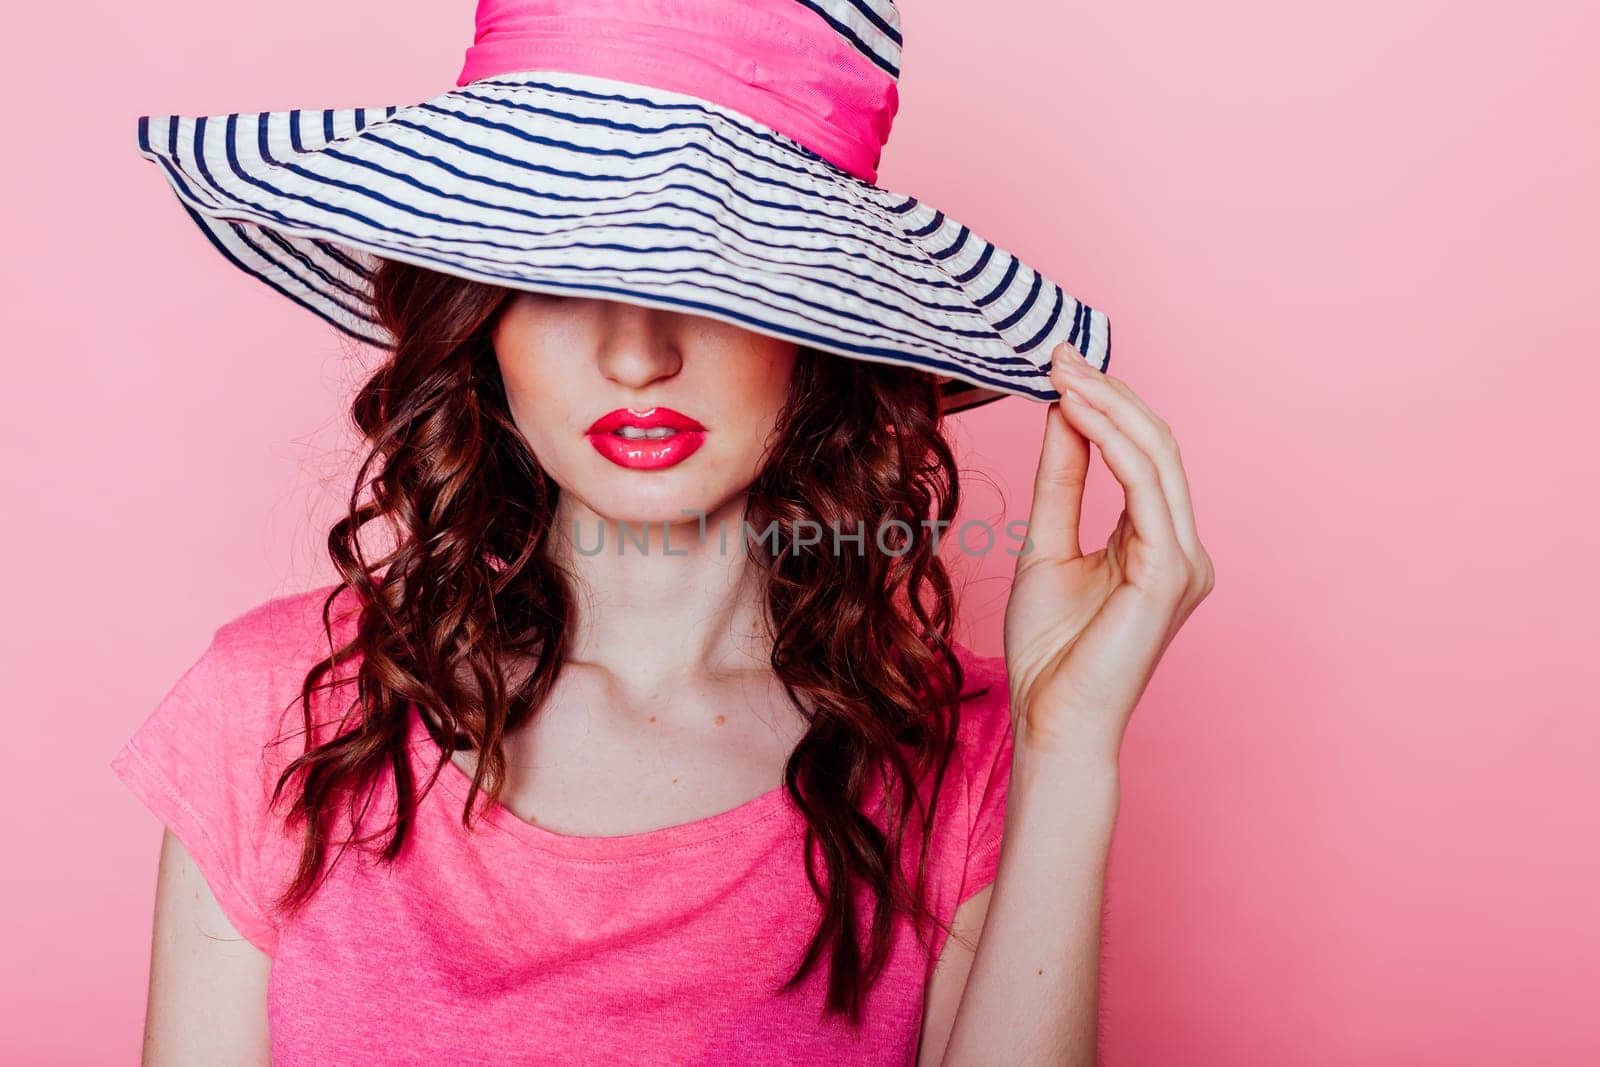 girl pinup-style in a pink dress with hat with brim